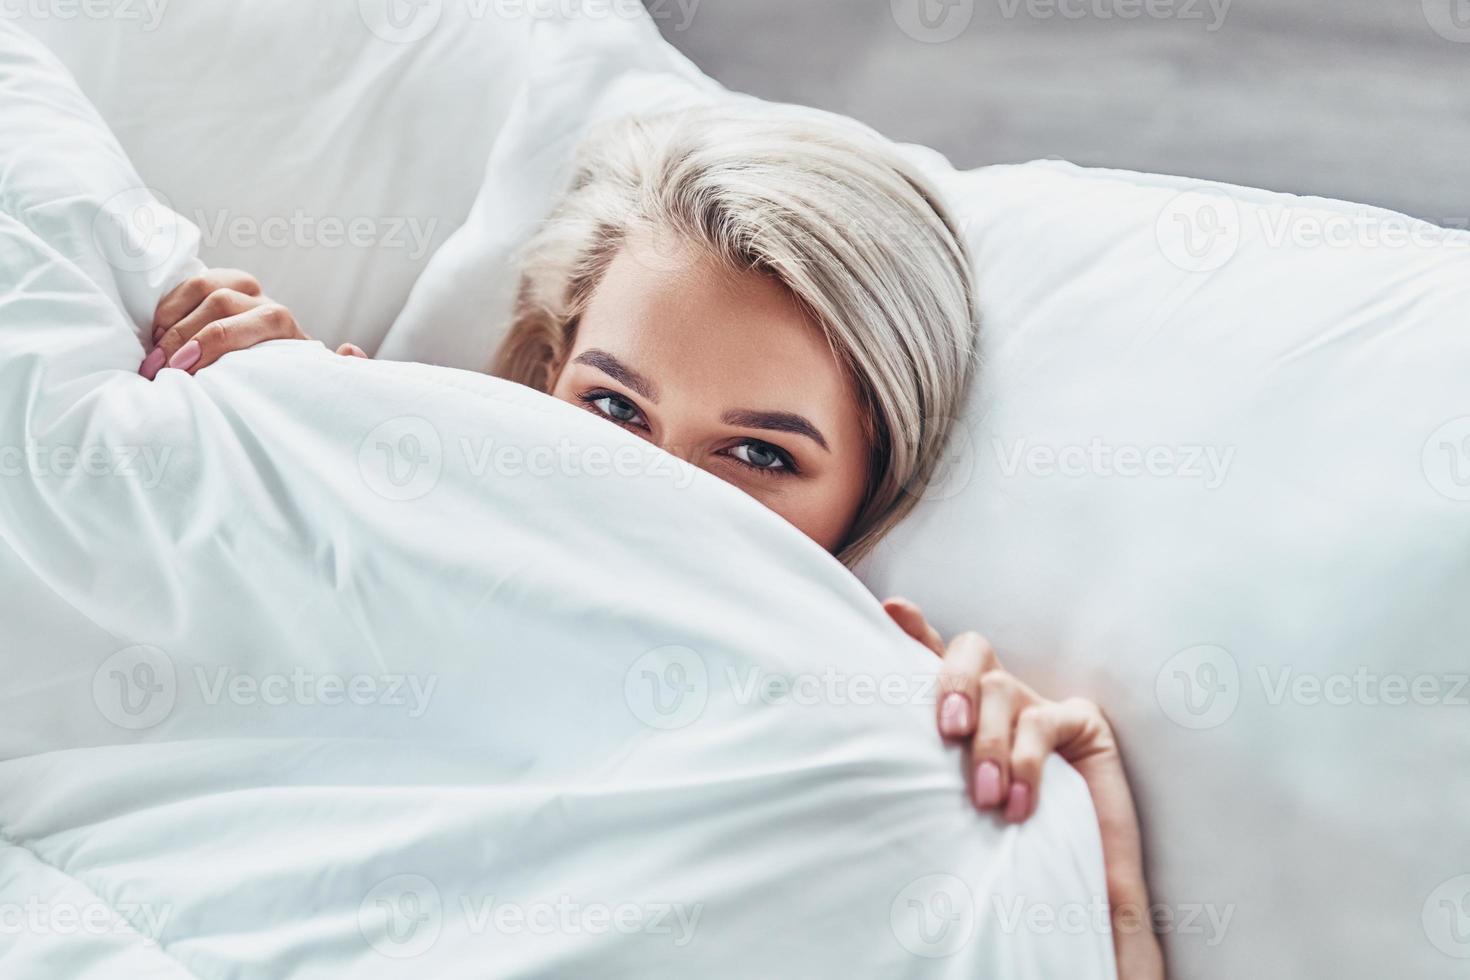 Too lazy to wake up. Top view of attractive young woman covering half of her face with blanket and looking at camera while lying in bed at home photo